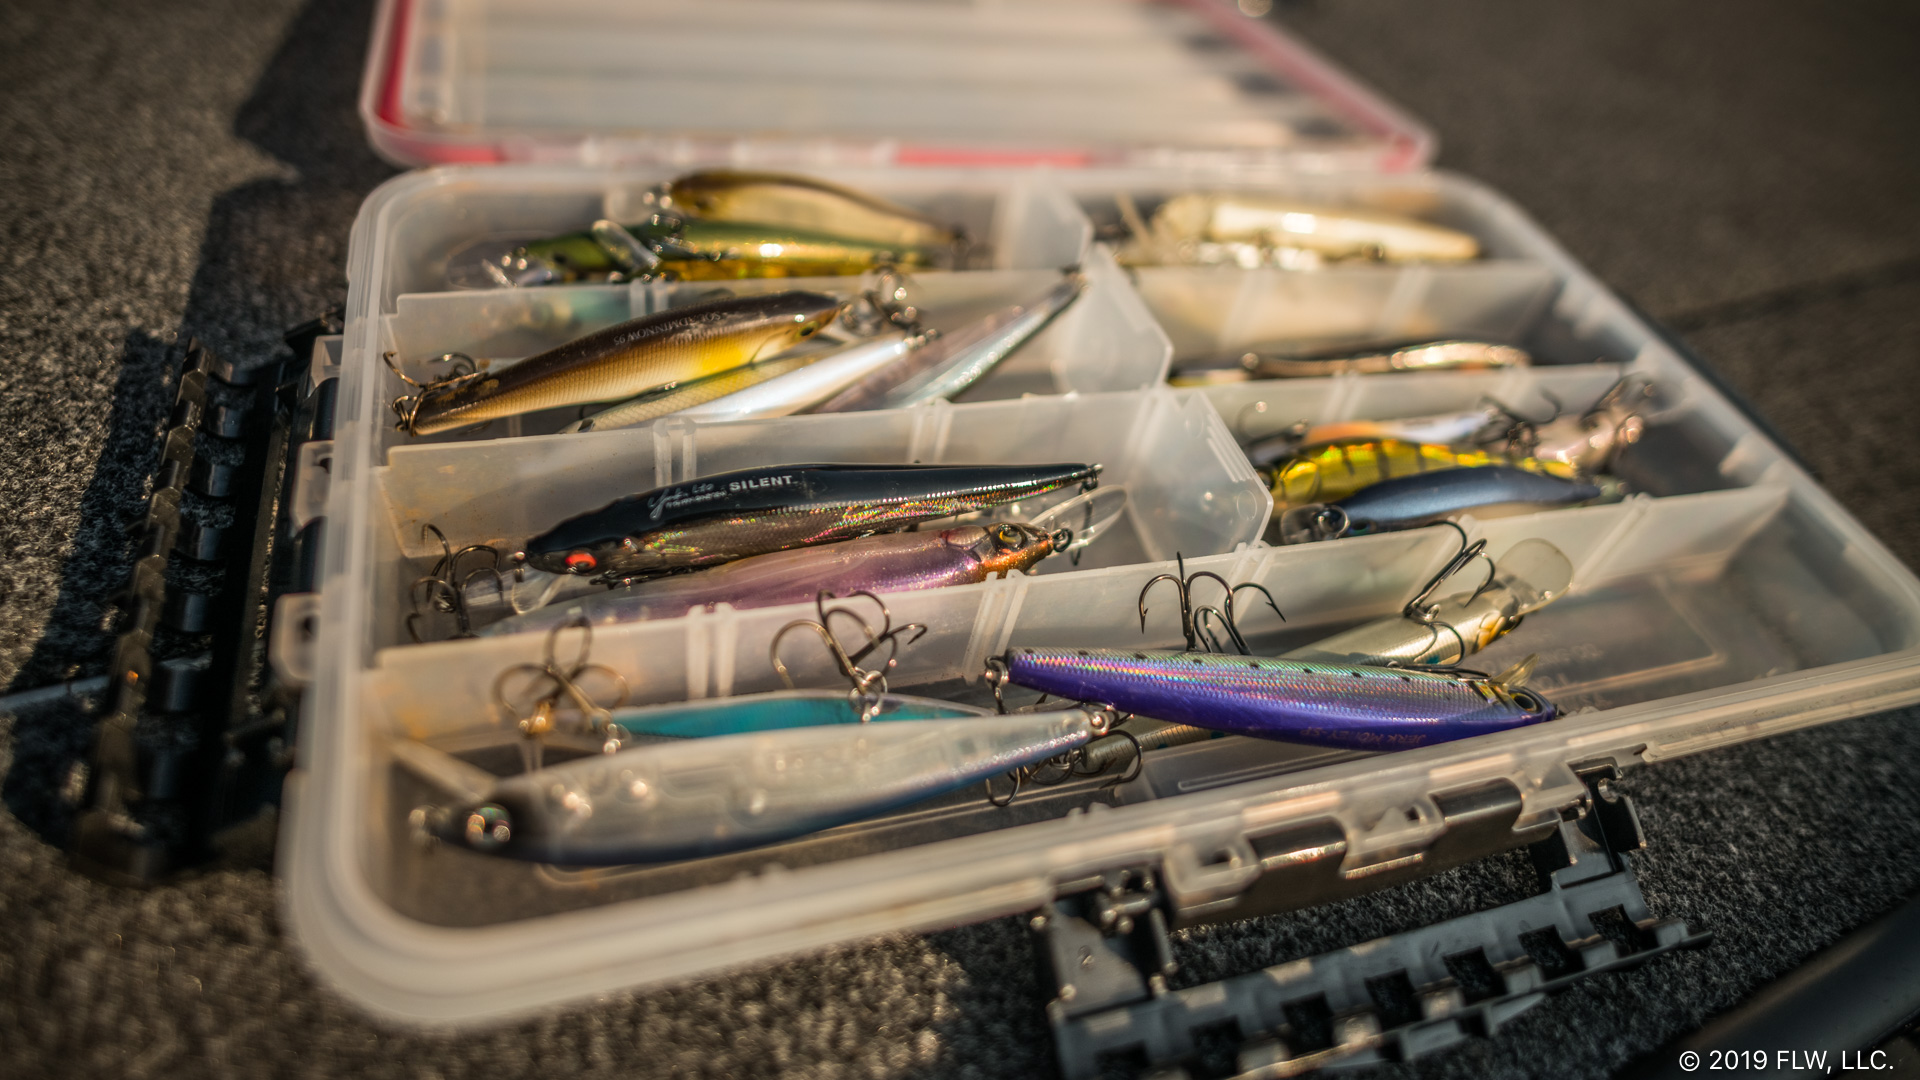 Staley-Johnson Lures – Old Indiana Lures